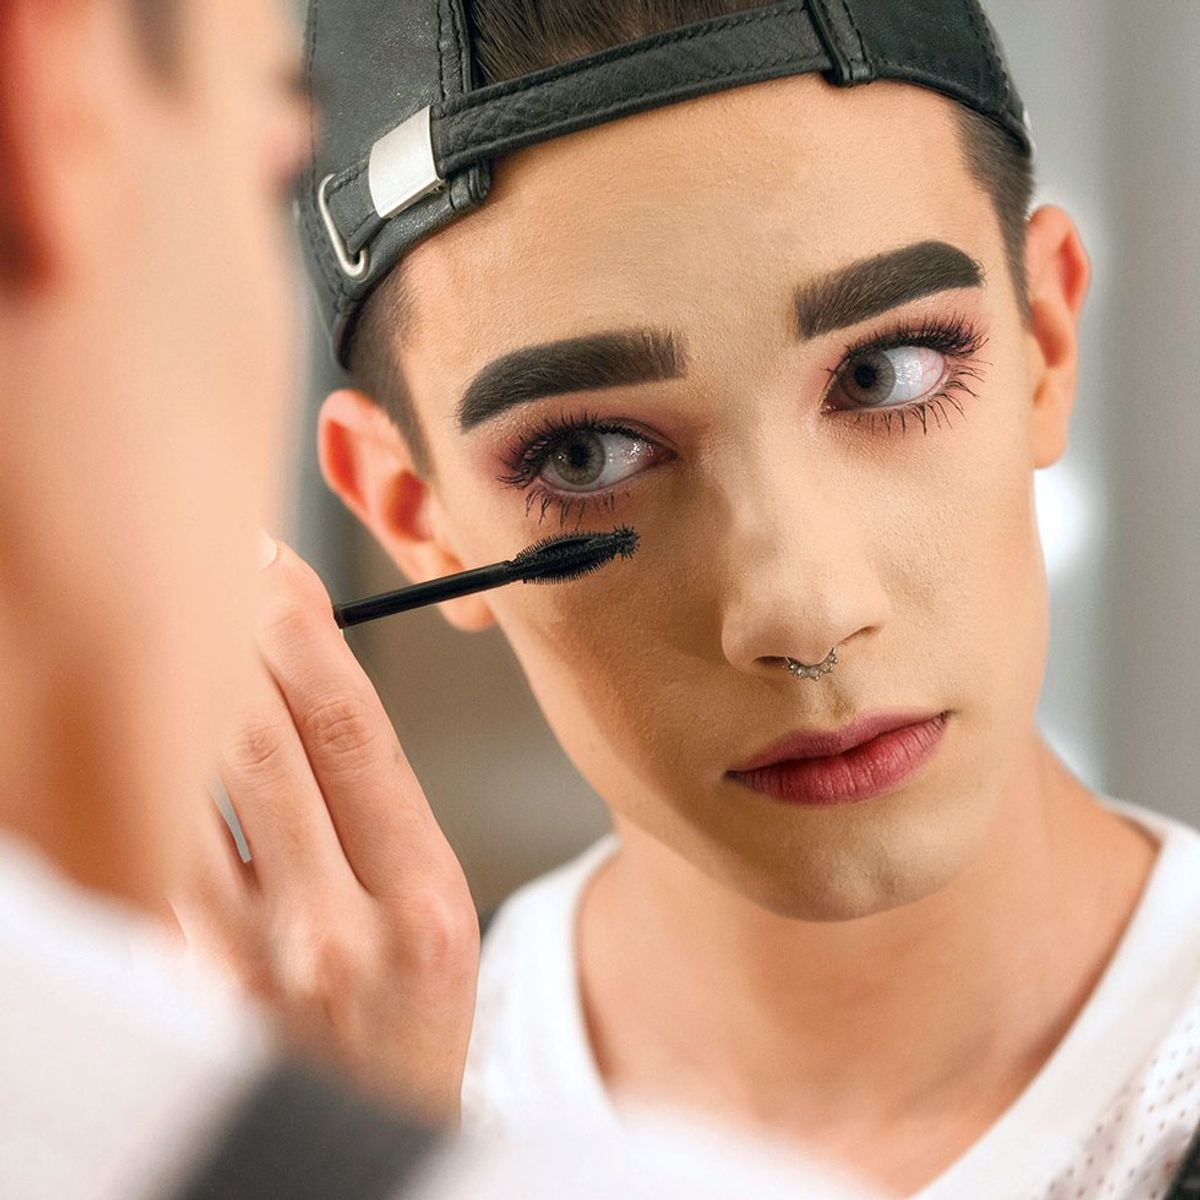 Boys Want to Wear Makeup Too!